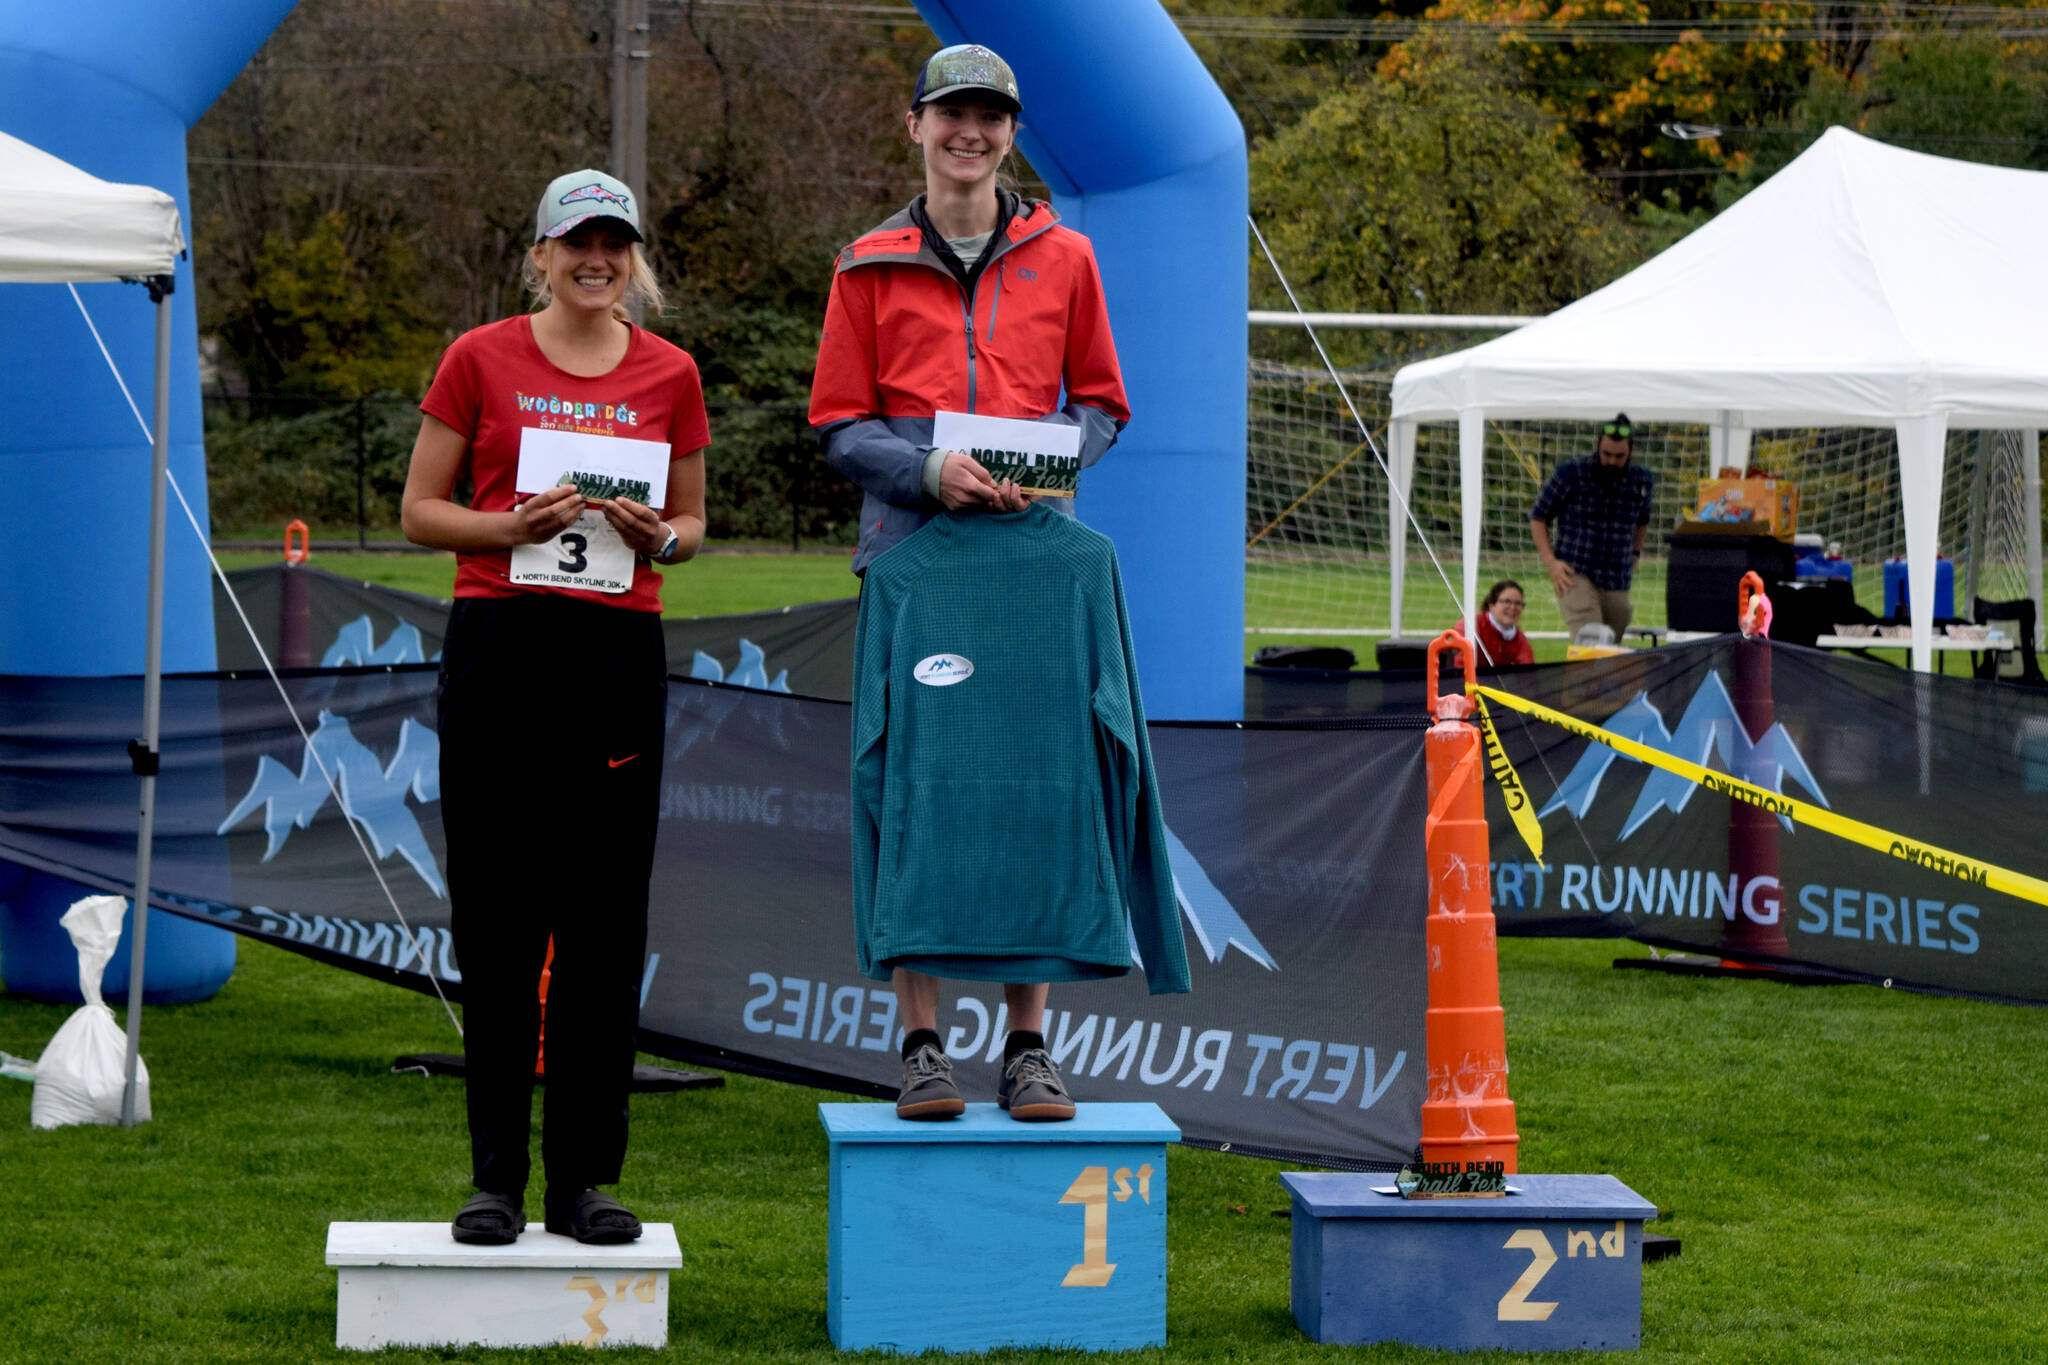 Two of the top 3 finsihers of North Bend Skyline 30k in the elite women’s divison.